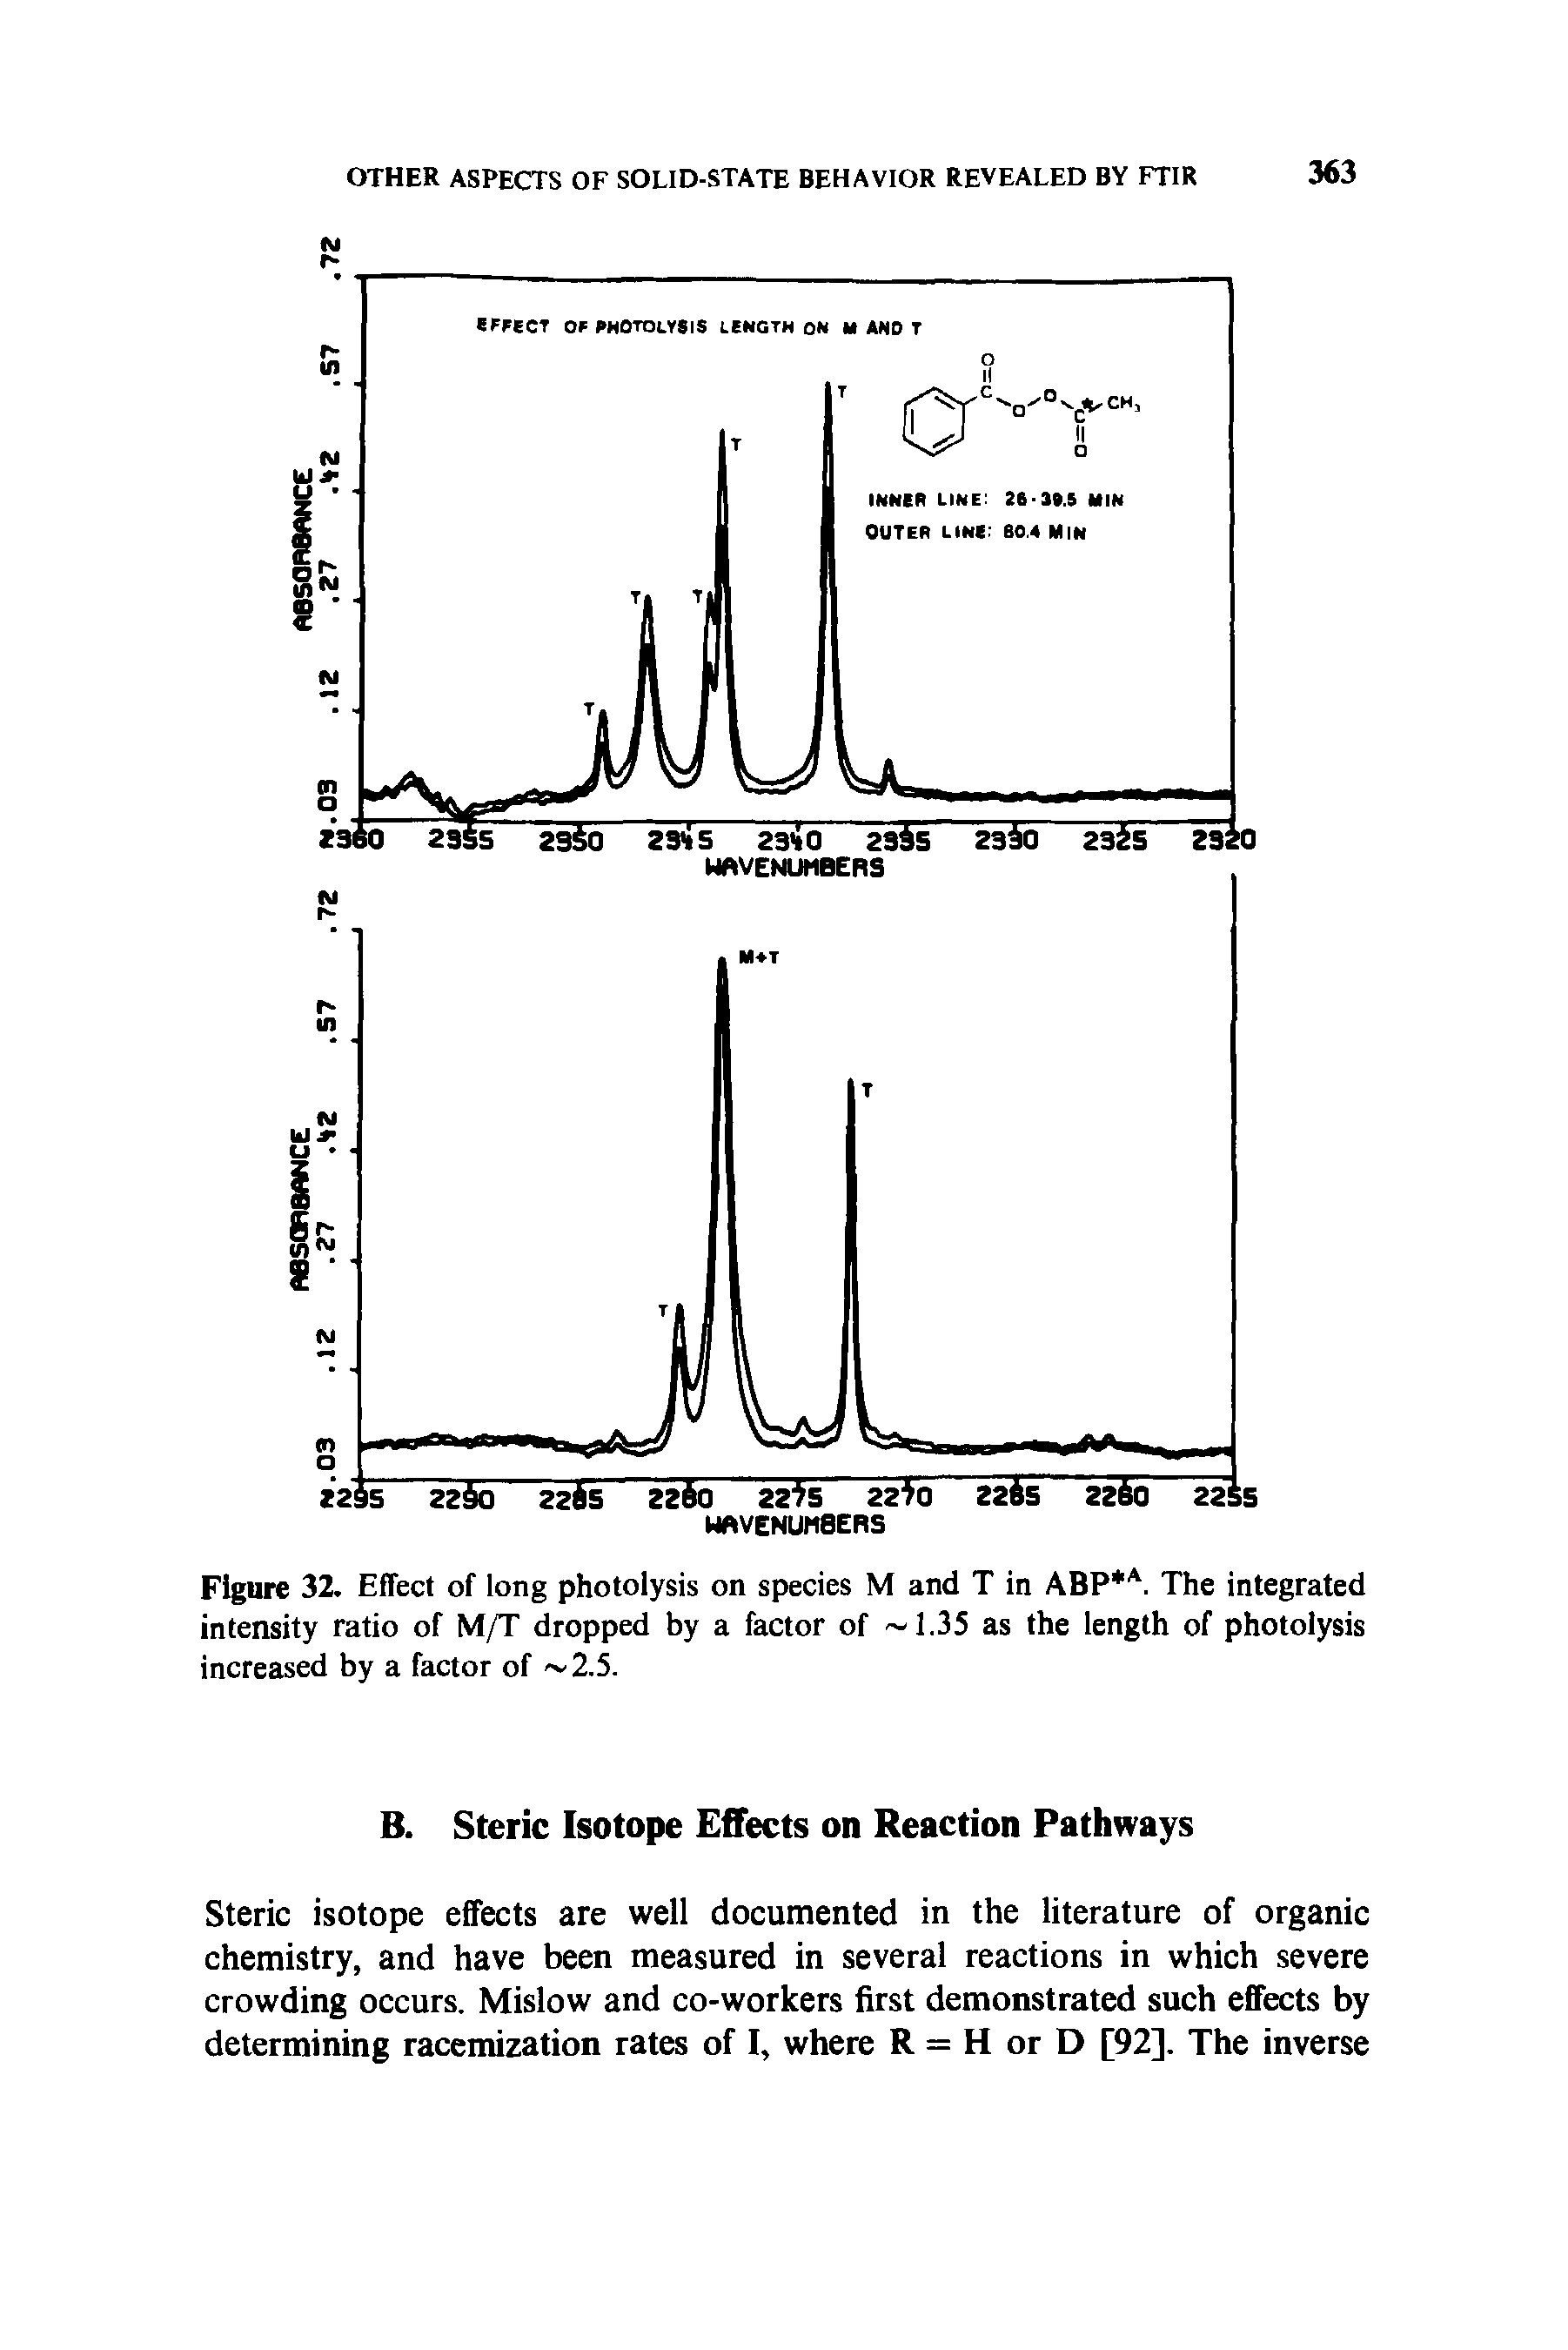 Figure 32. Effect of long photolysis on species M and T in ABP A. The integrated intensity ratio of M/T dropped by a factor of 1.35 as the length of photolysis increased by a factor of 2.5.